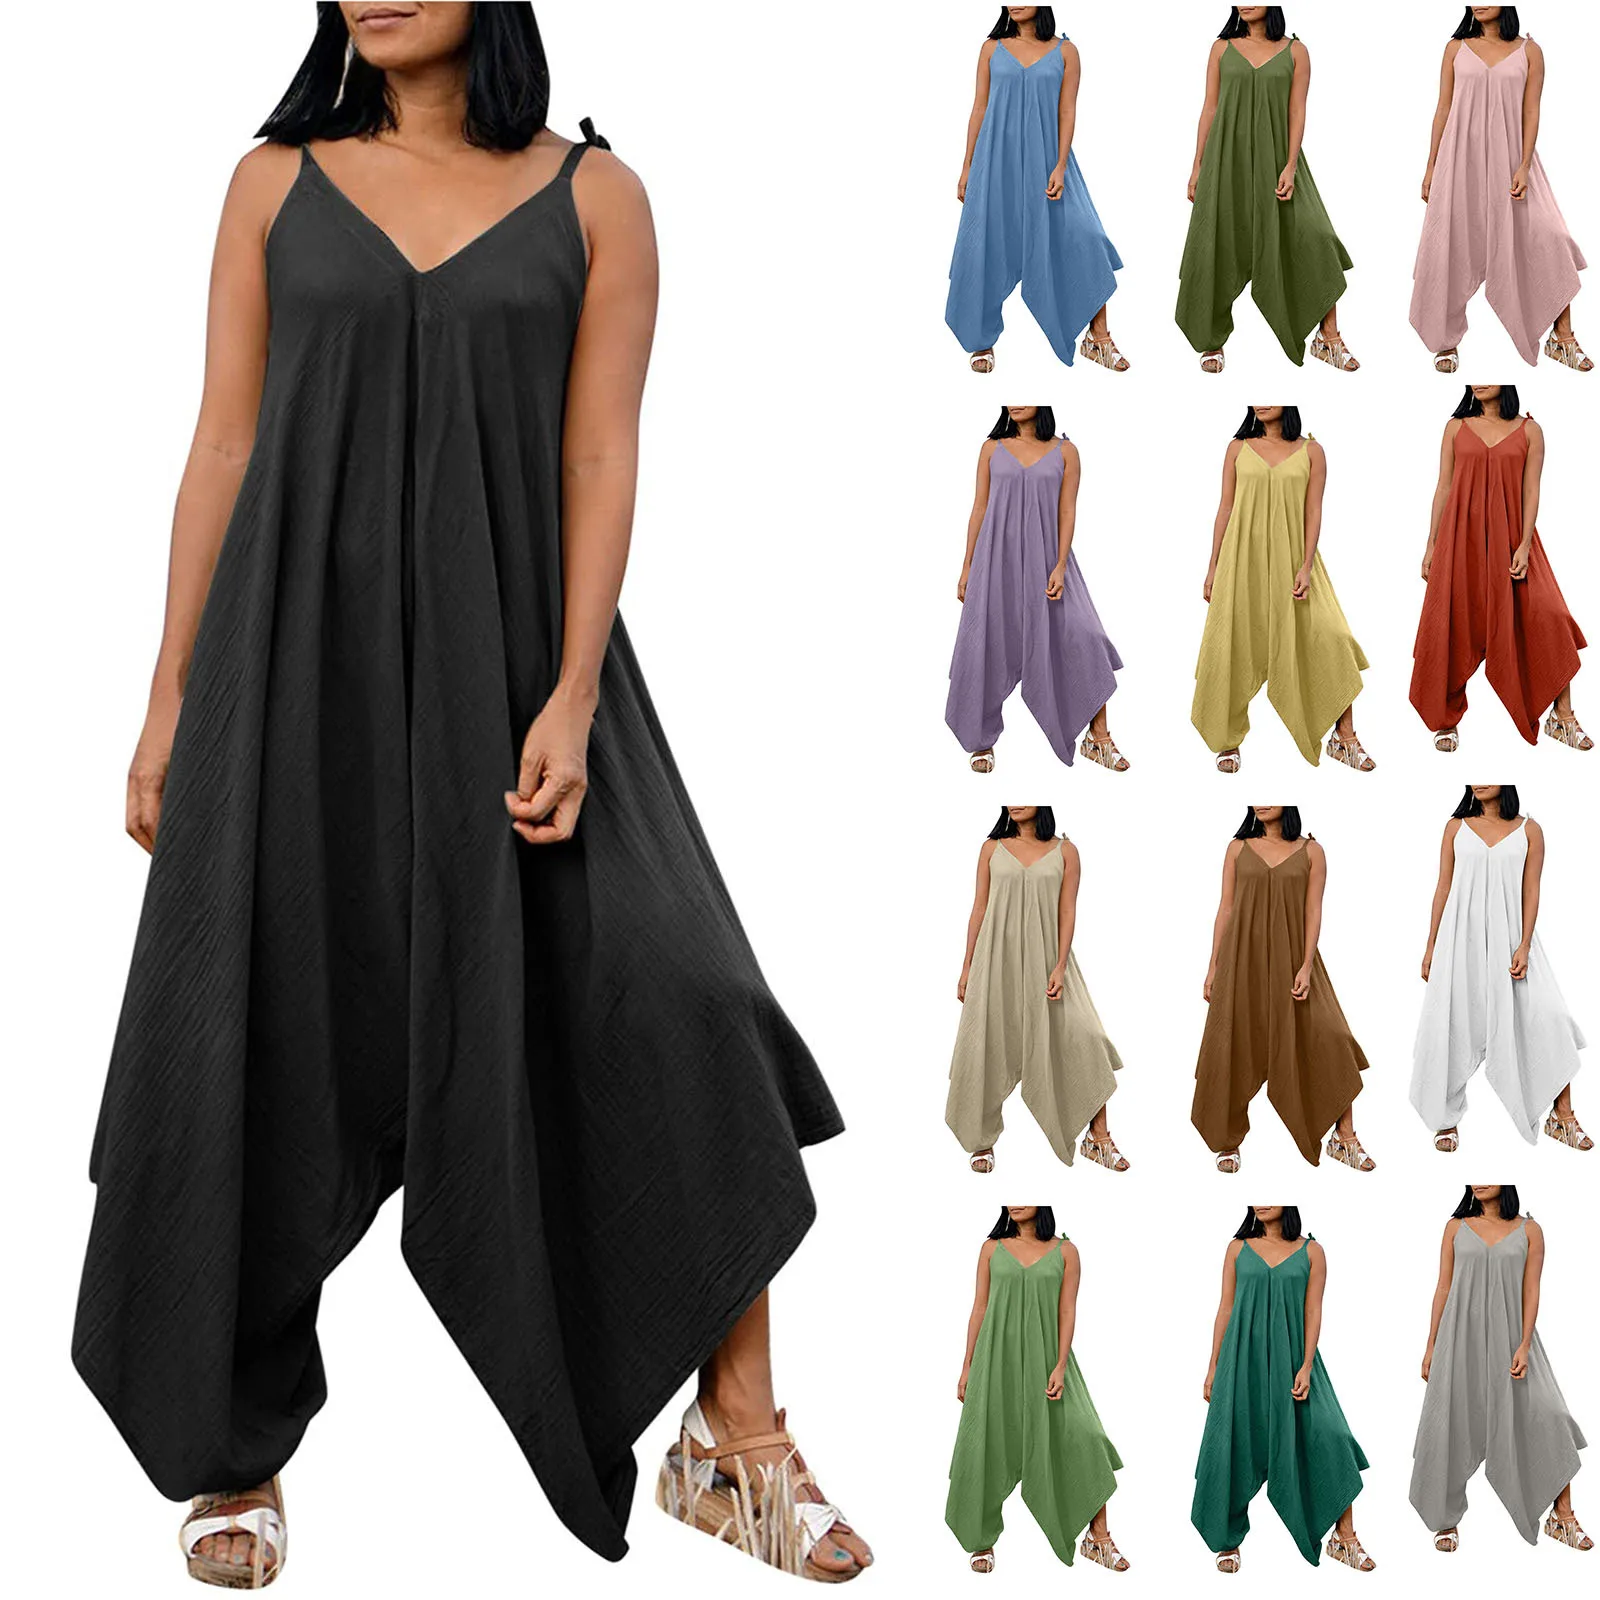 v neck stripe casual satin romper women batwing sleeve wide leg fashion playsuits overalls bowknot loose rompers 2021 Loose Maternity Bib Pant Suspender Trouser Casual Female Women V-Neck One-Piece Wide Leg Romper Overalls Strap Jumpsuit Oversize